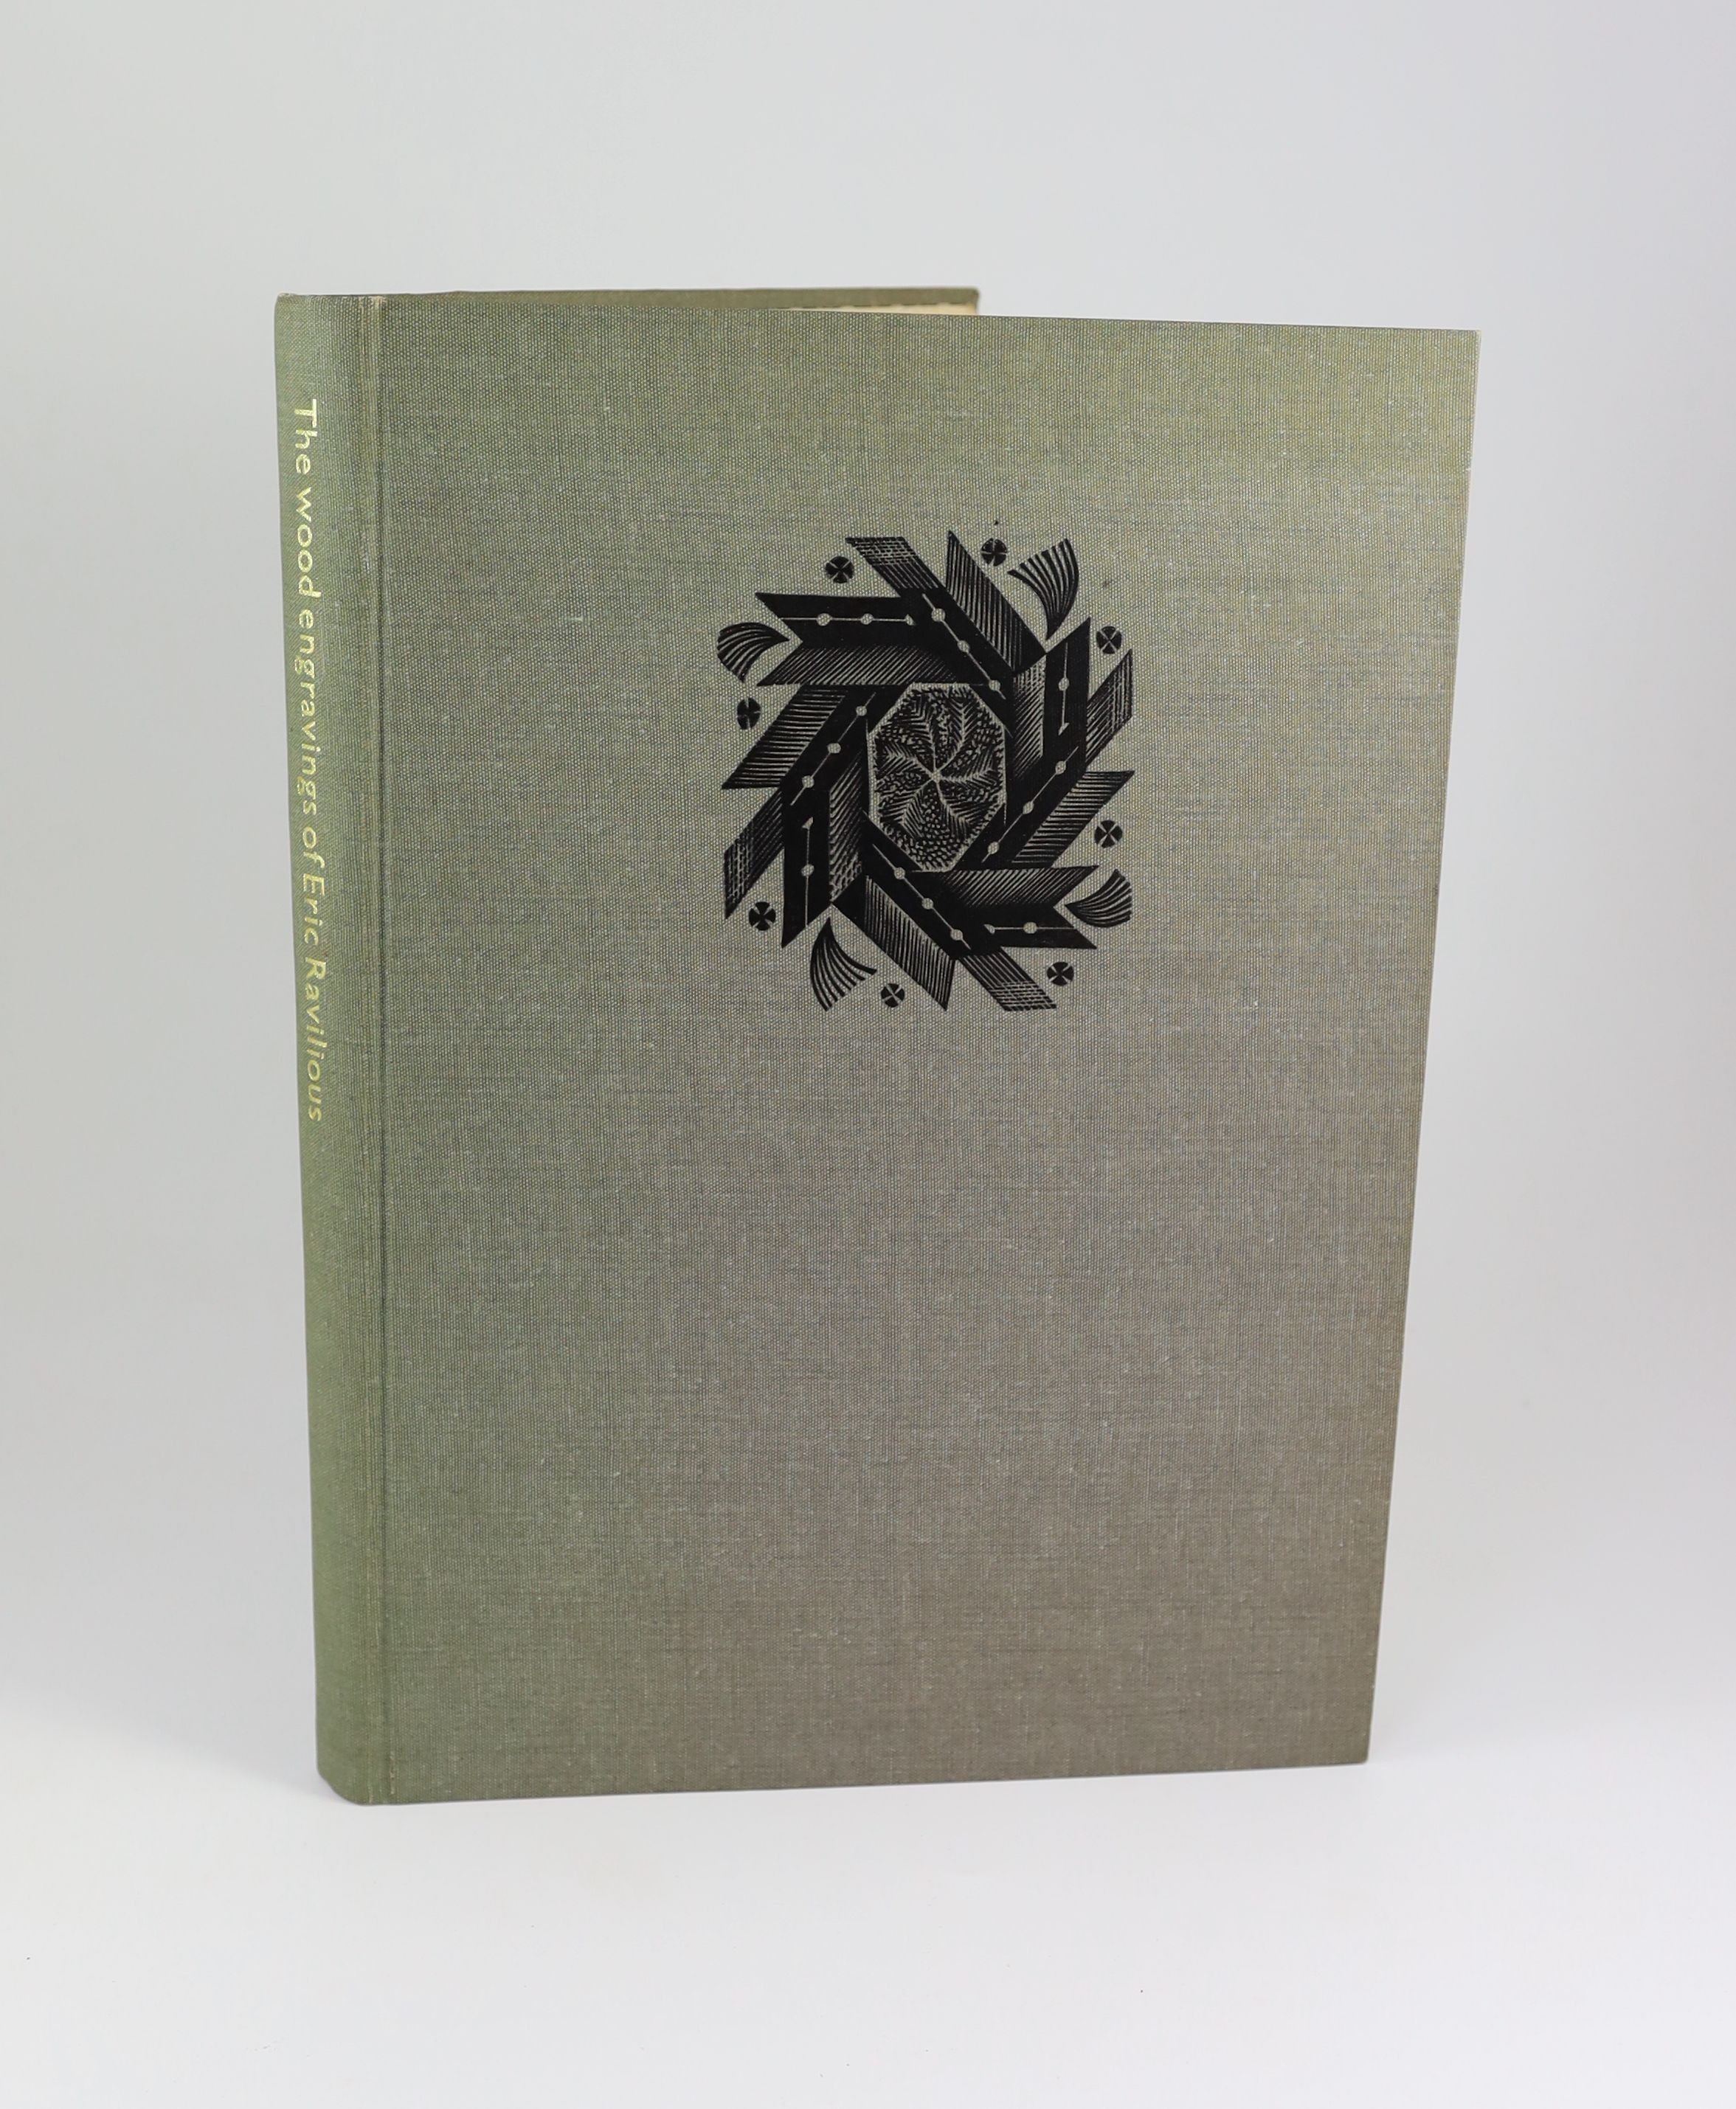 Ravilious, Eric - The Wood Engravings of Eric Ravilious, second issue, one of an unspecified number [500], introduction by J.M. Richards, folio, original cloth, Lion and Unicorn Press, London, 1972